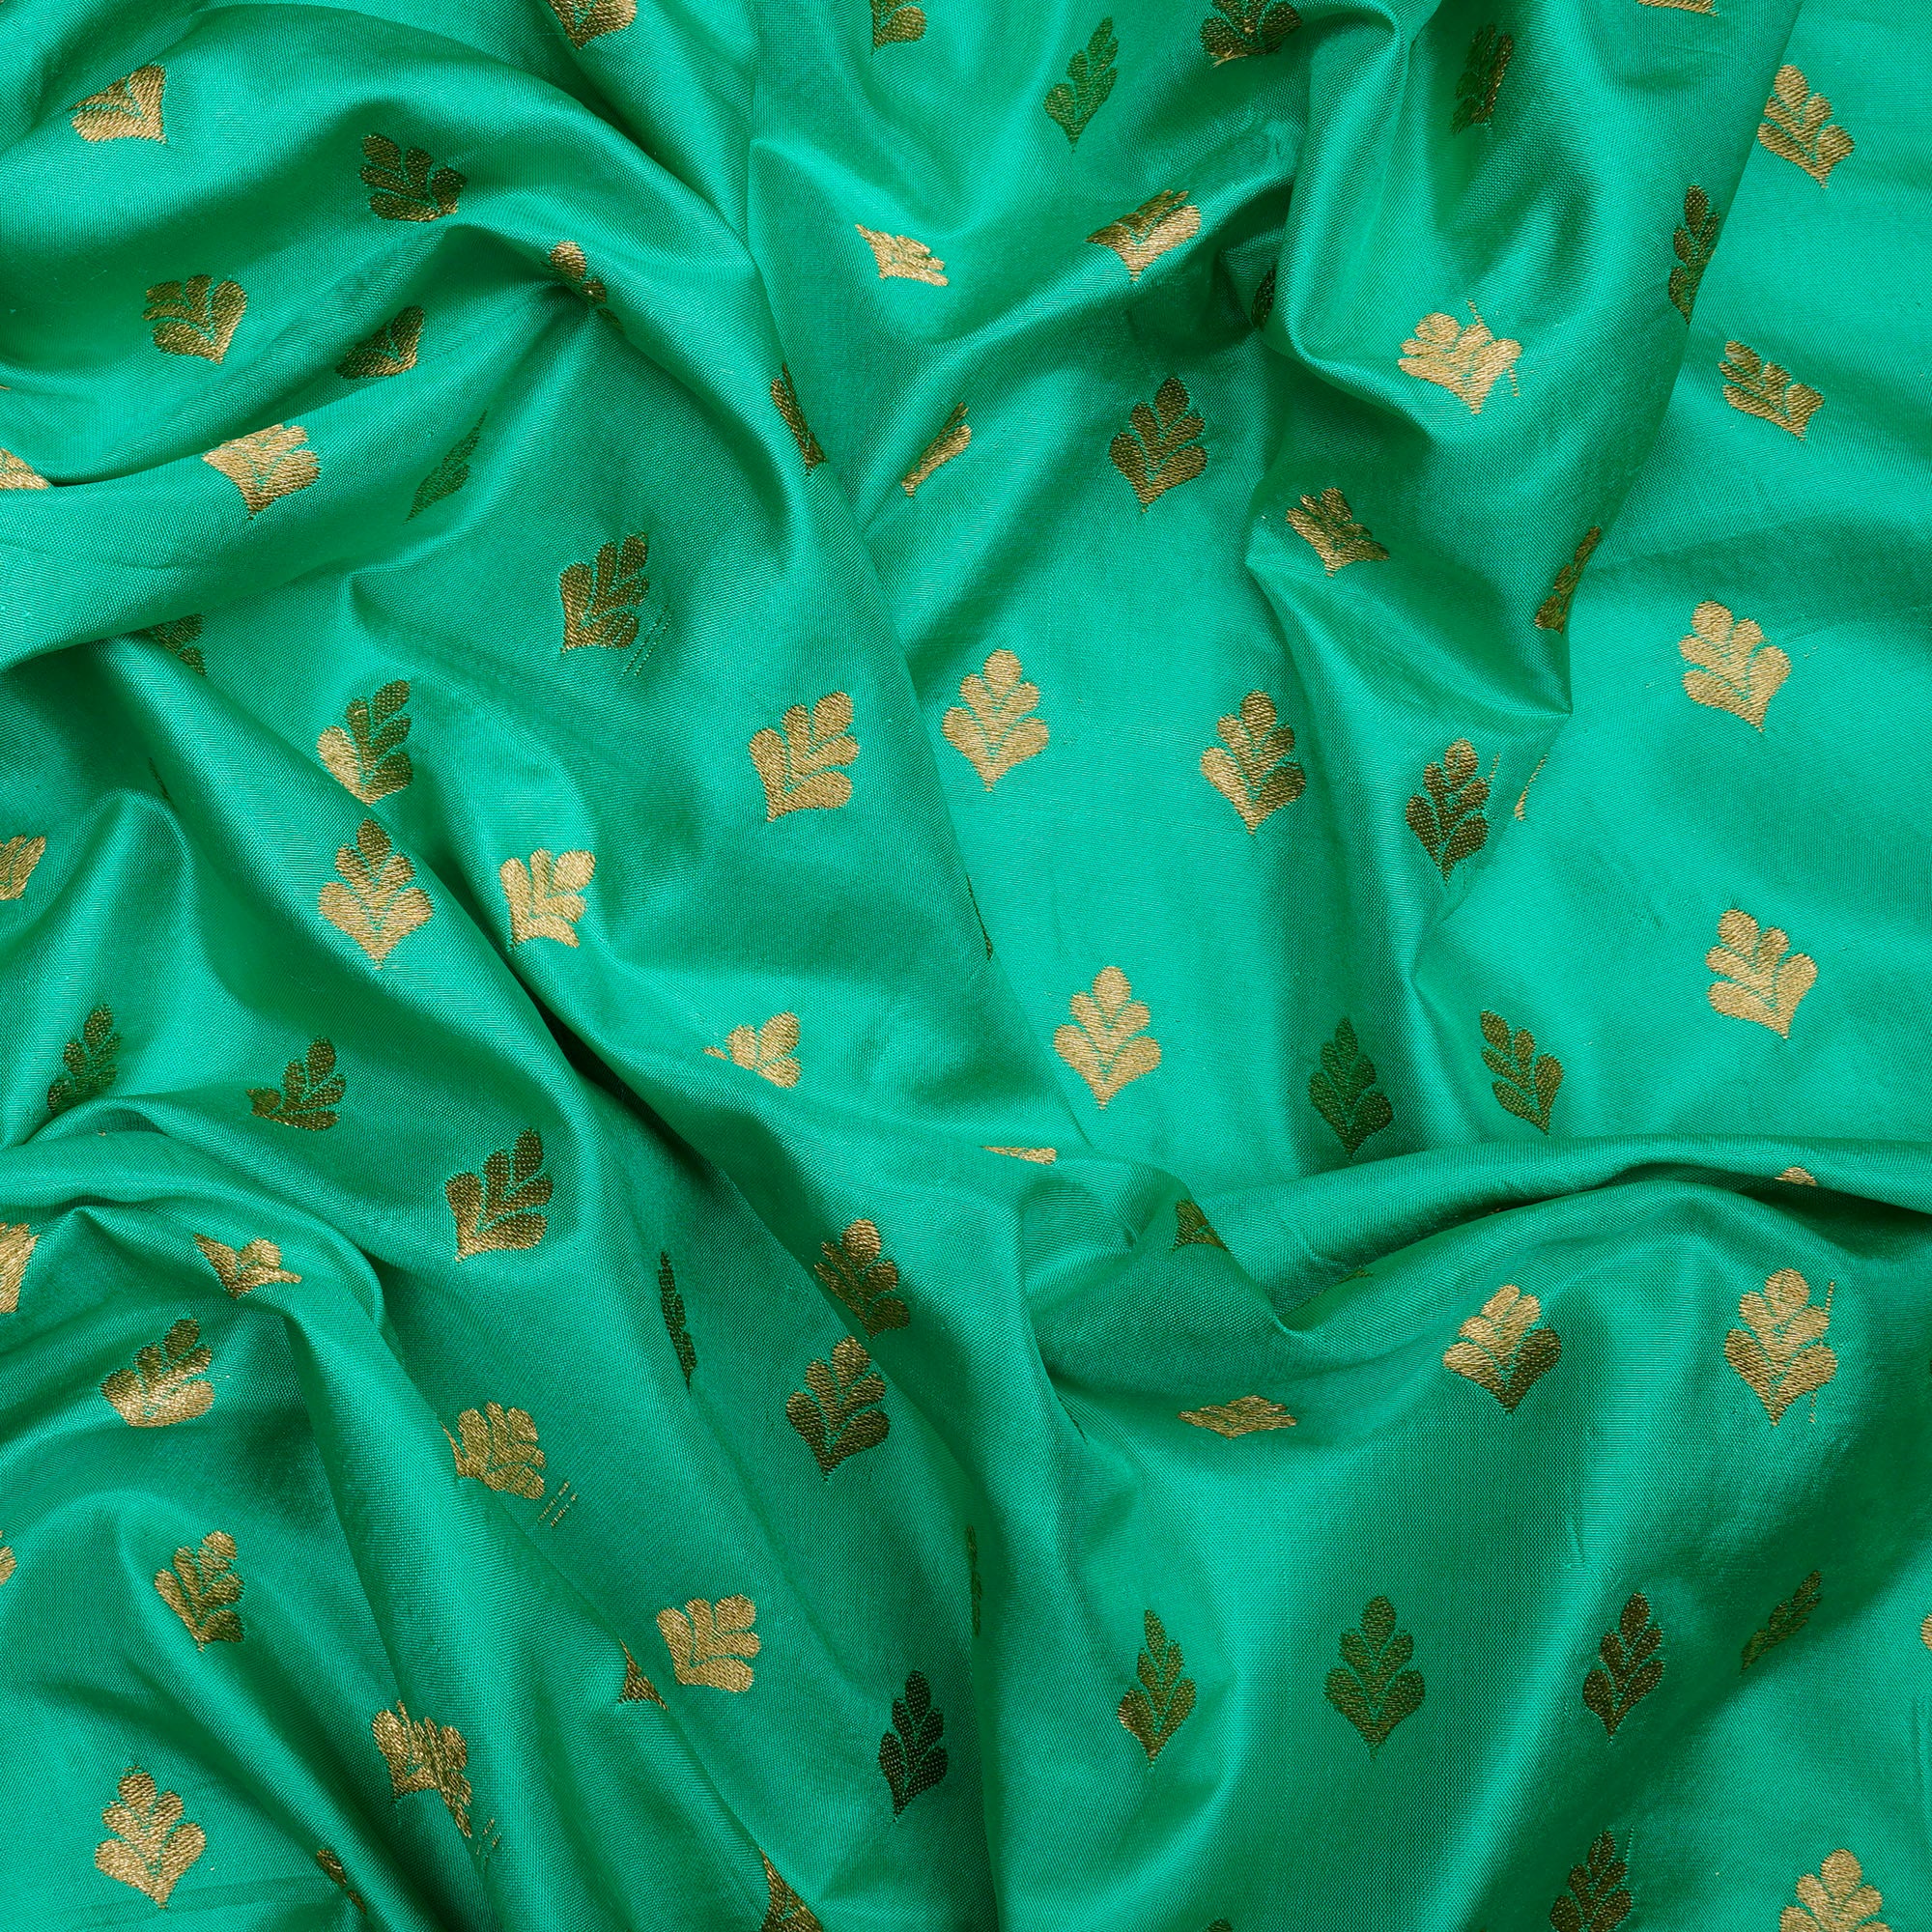 Turquoise Color Handwoven Brocade Fabric